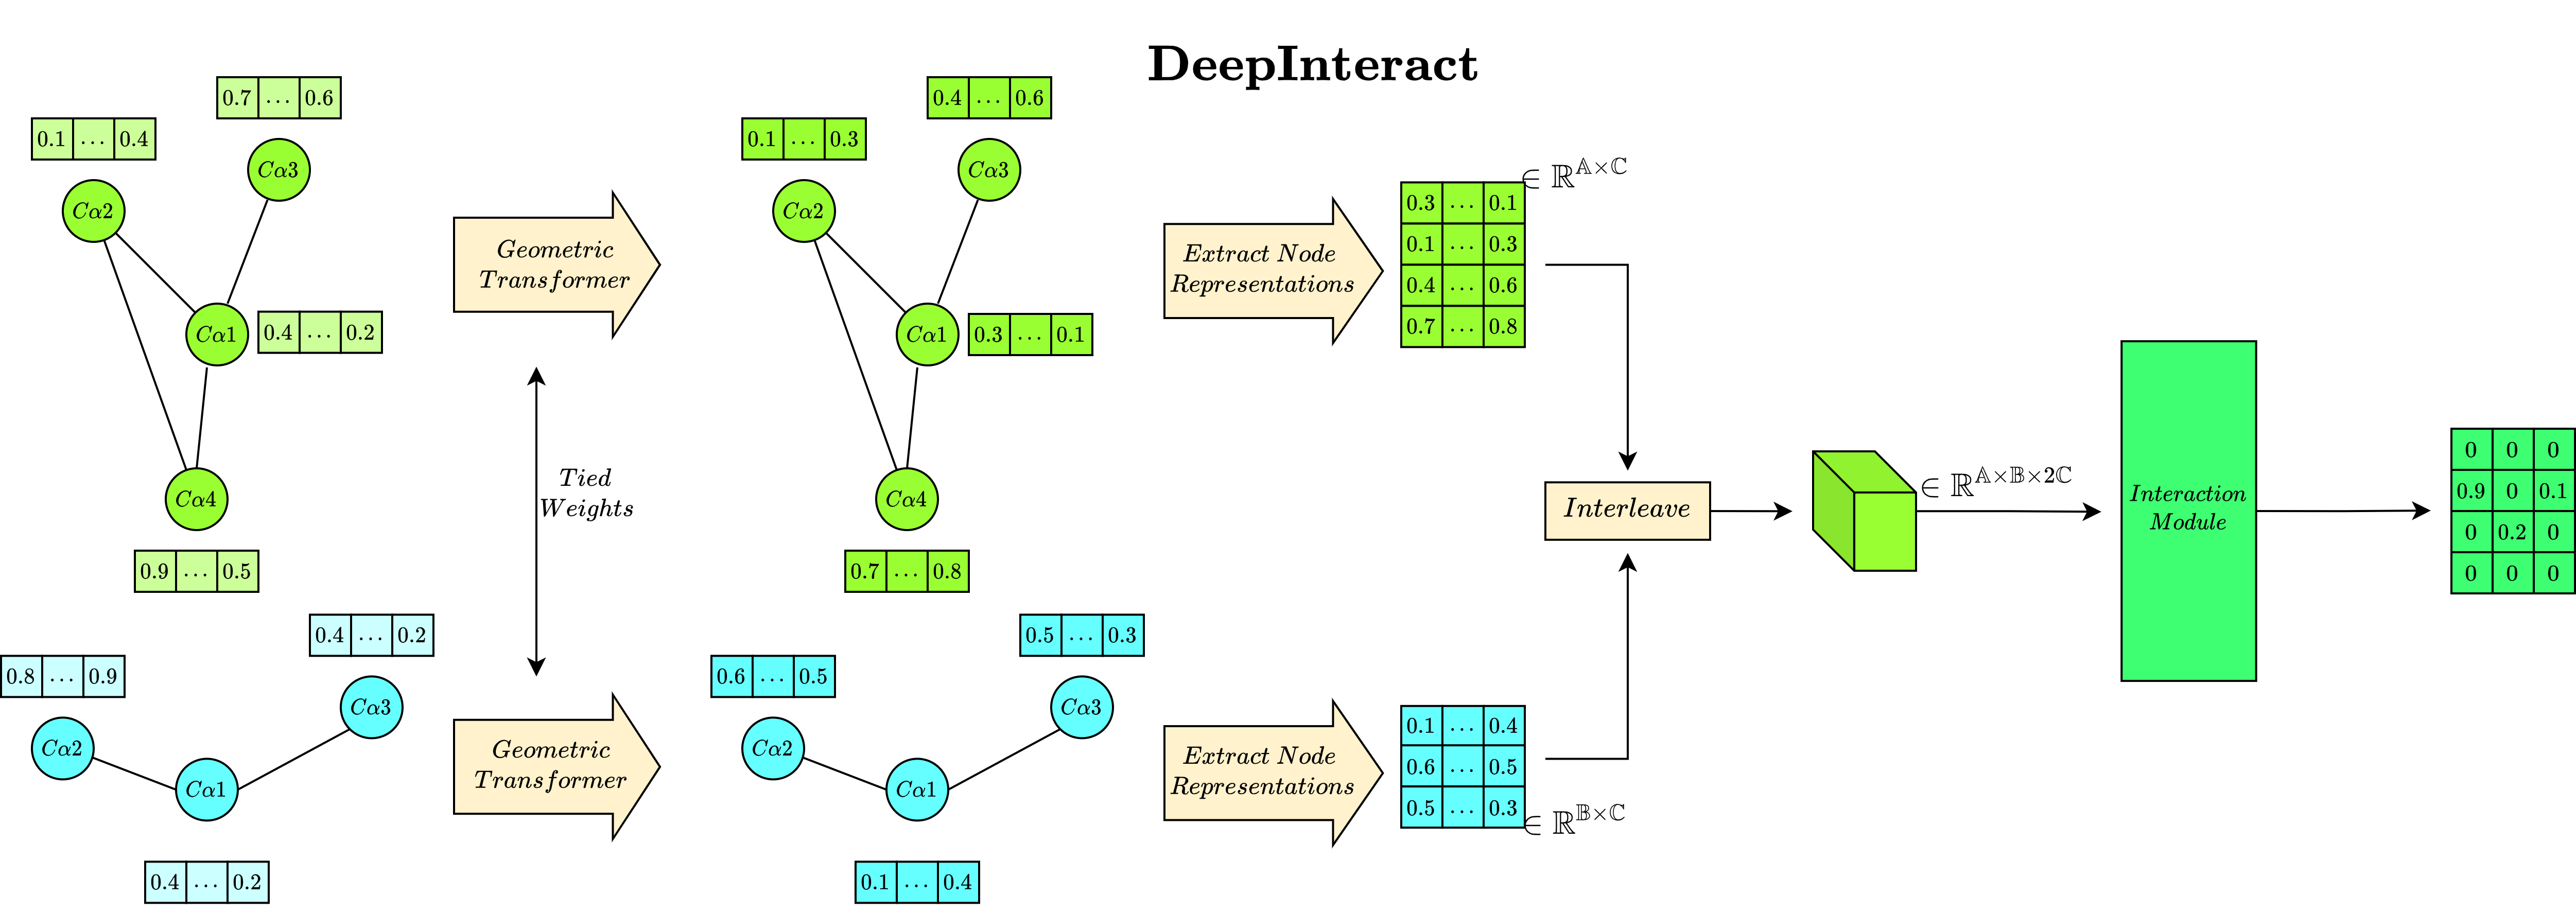 DeepInteract_Architecture.png